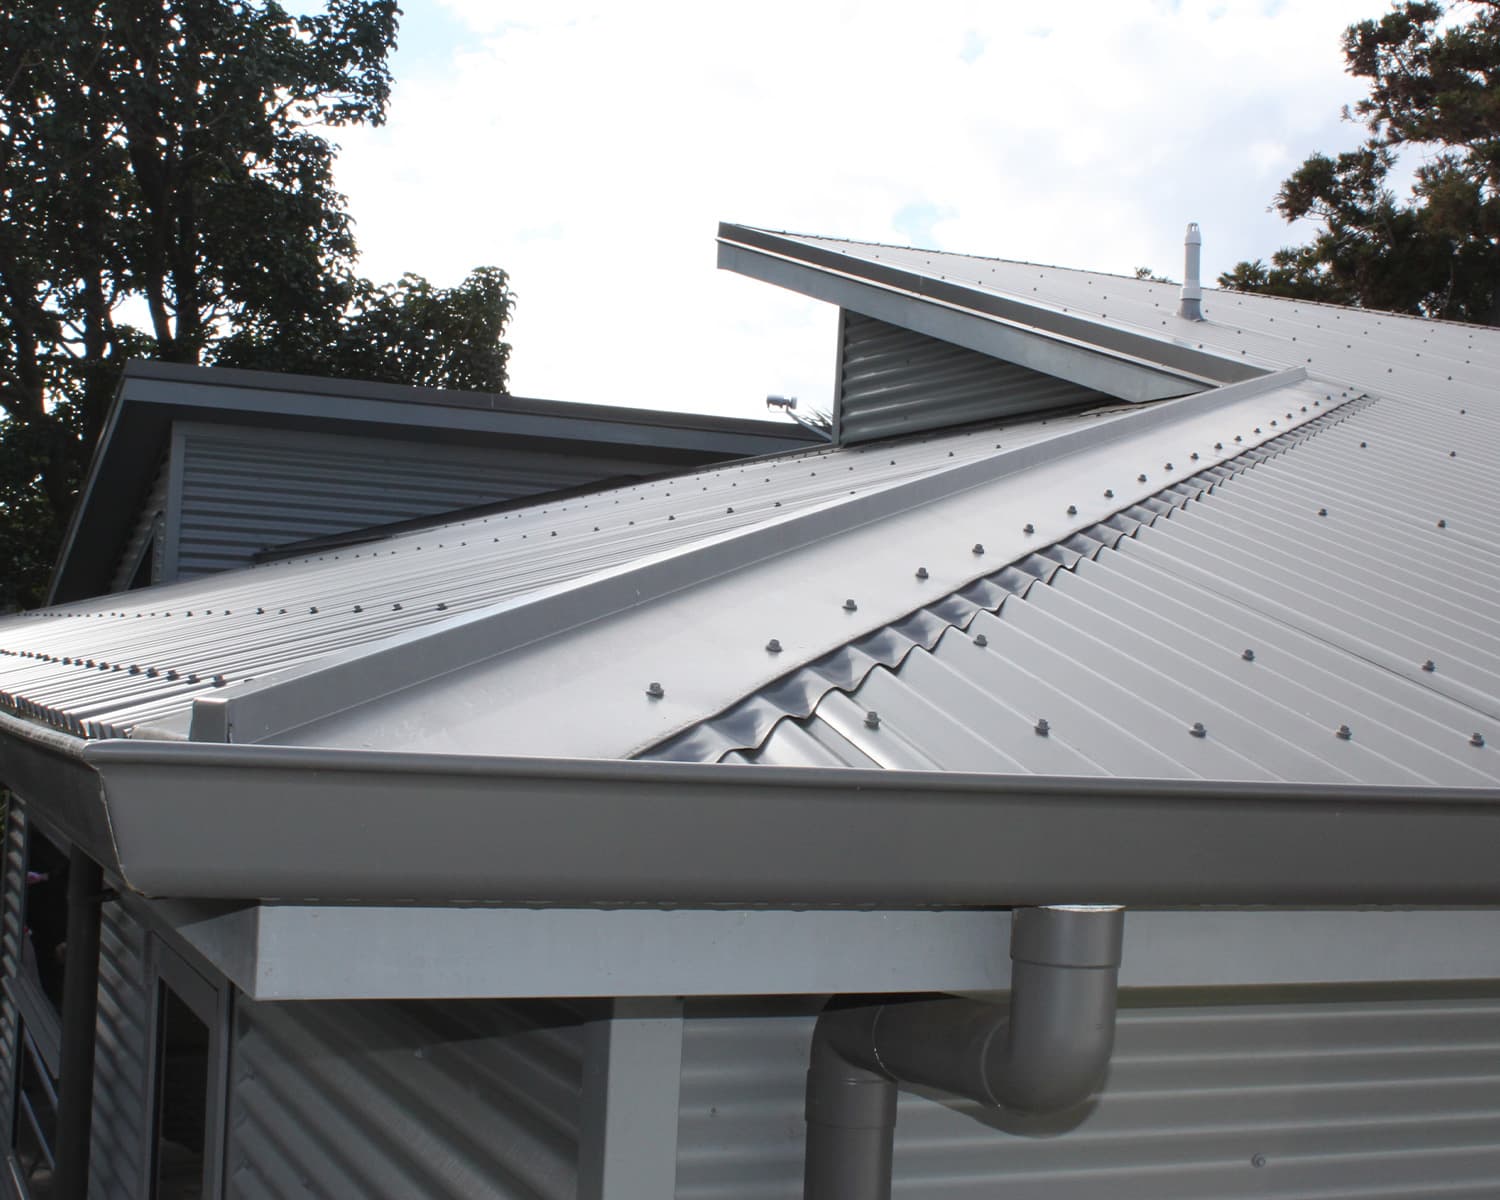 custom roof tauranga and bay of plenty roofing services new roofing re roofings repairs maintenance 2